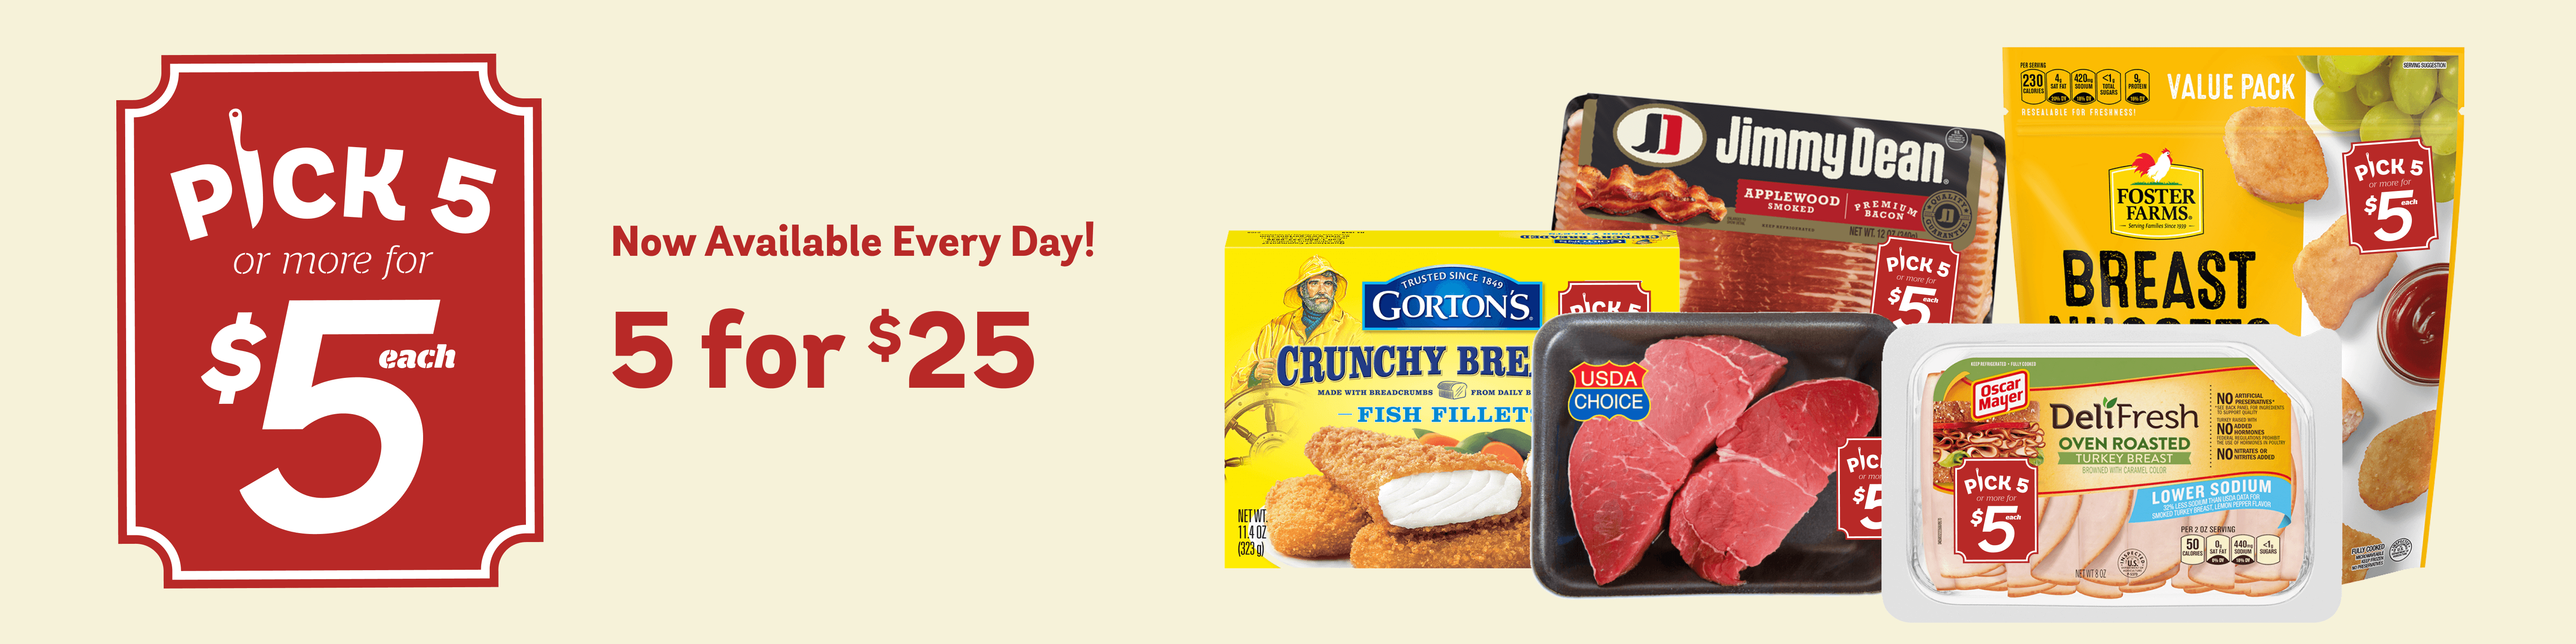 Pick 5 Banner - Now Available Every Day! Pick 5 or more meat items for $5 each. For example, you can get Choice Beef Petite Sirloin Ball Tip Steak up to 16 oz, Foster Farms Breast Nuggets 2 lbs, Jimmy Dean Bacon, Applewood Smoked, Premium 12 oz, Gorton’s Crunchy Fish Fillet and Oscar Meyer Deli Fresh Turkey Breast, all 5 for $25.